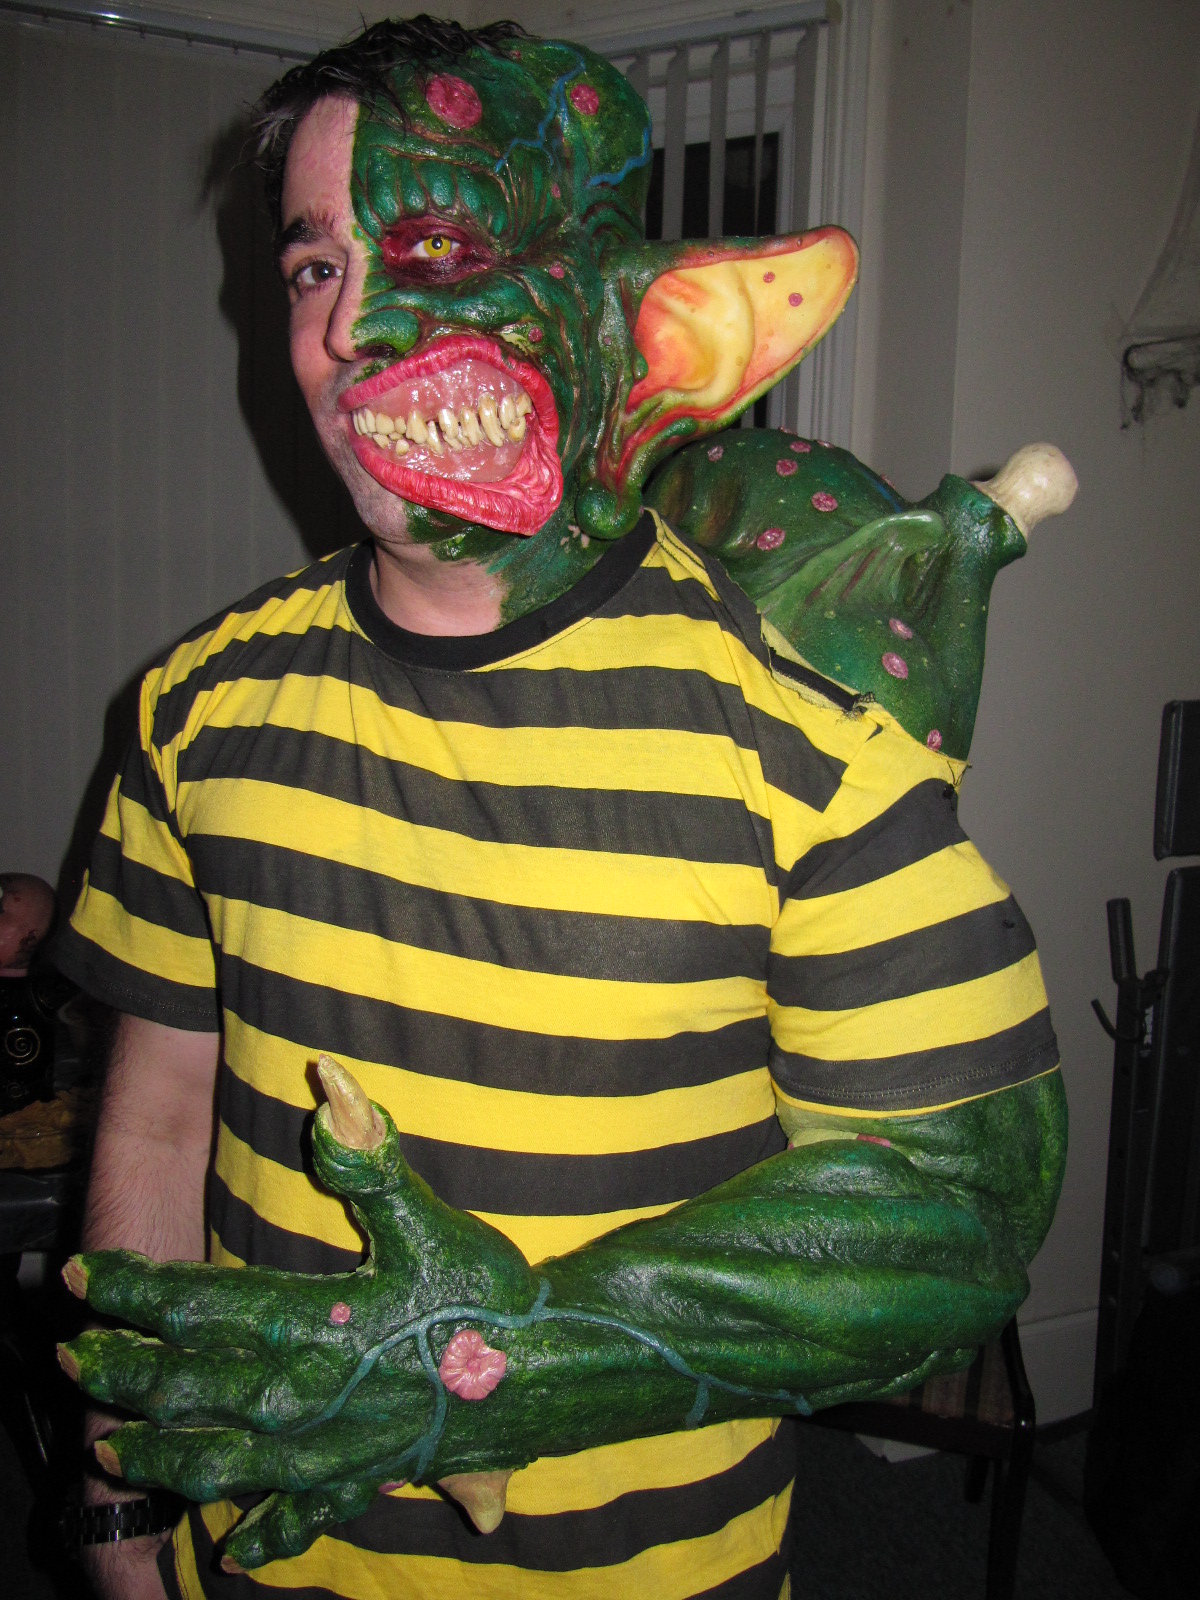 Fan goes all-out in Ricky Coogin costume from the cult film Freaked